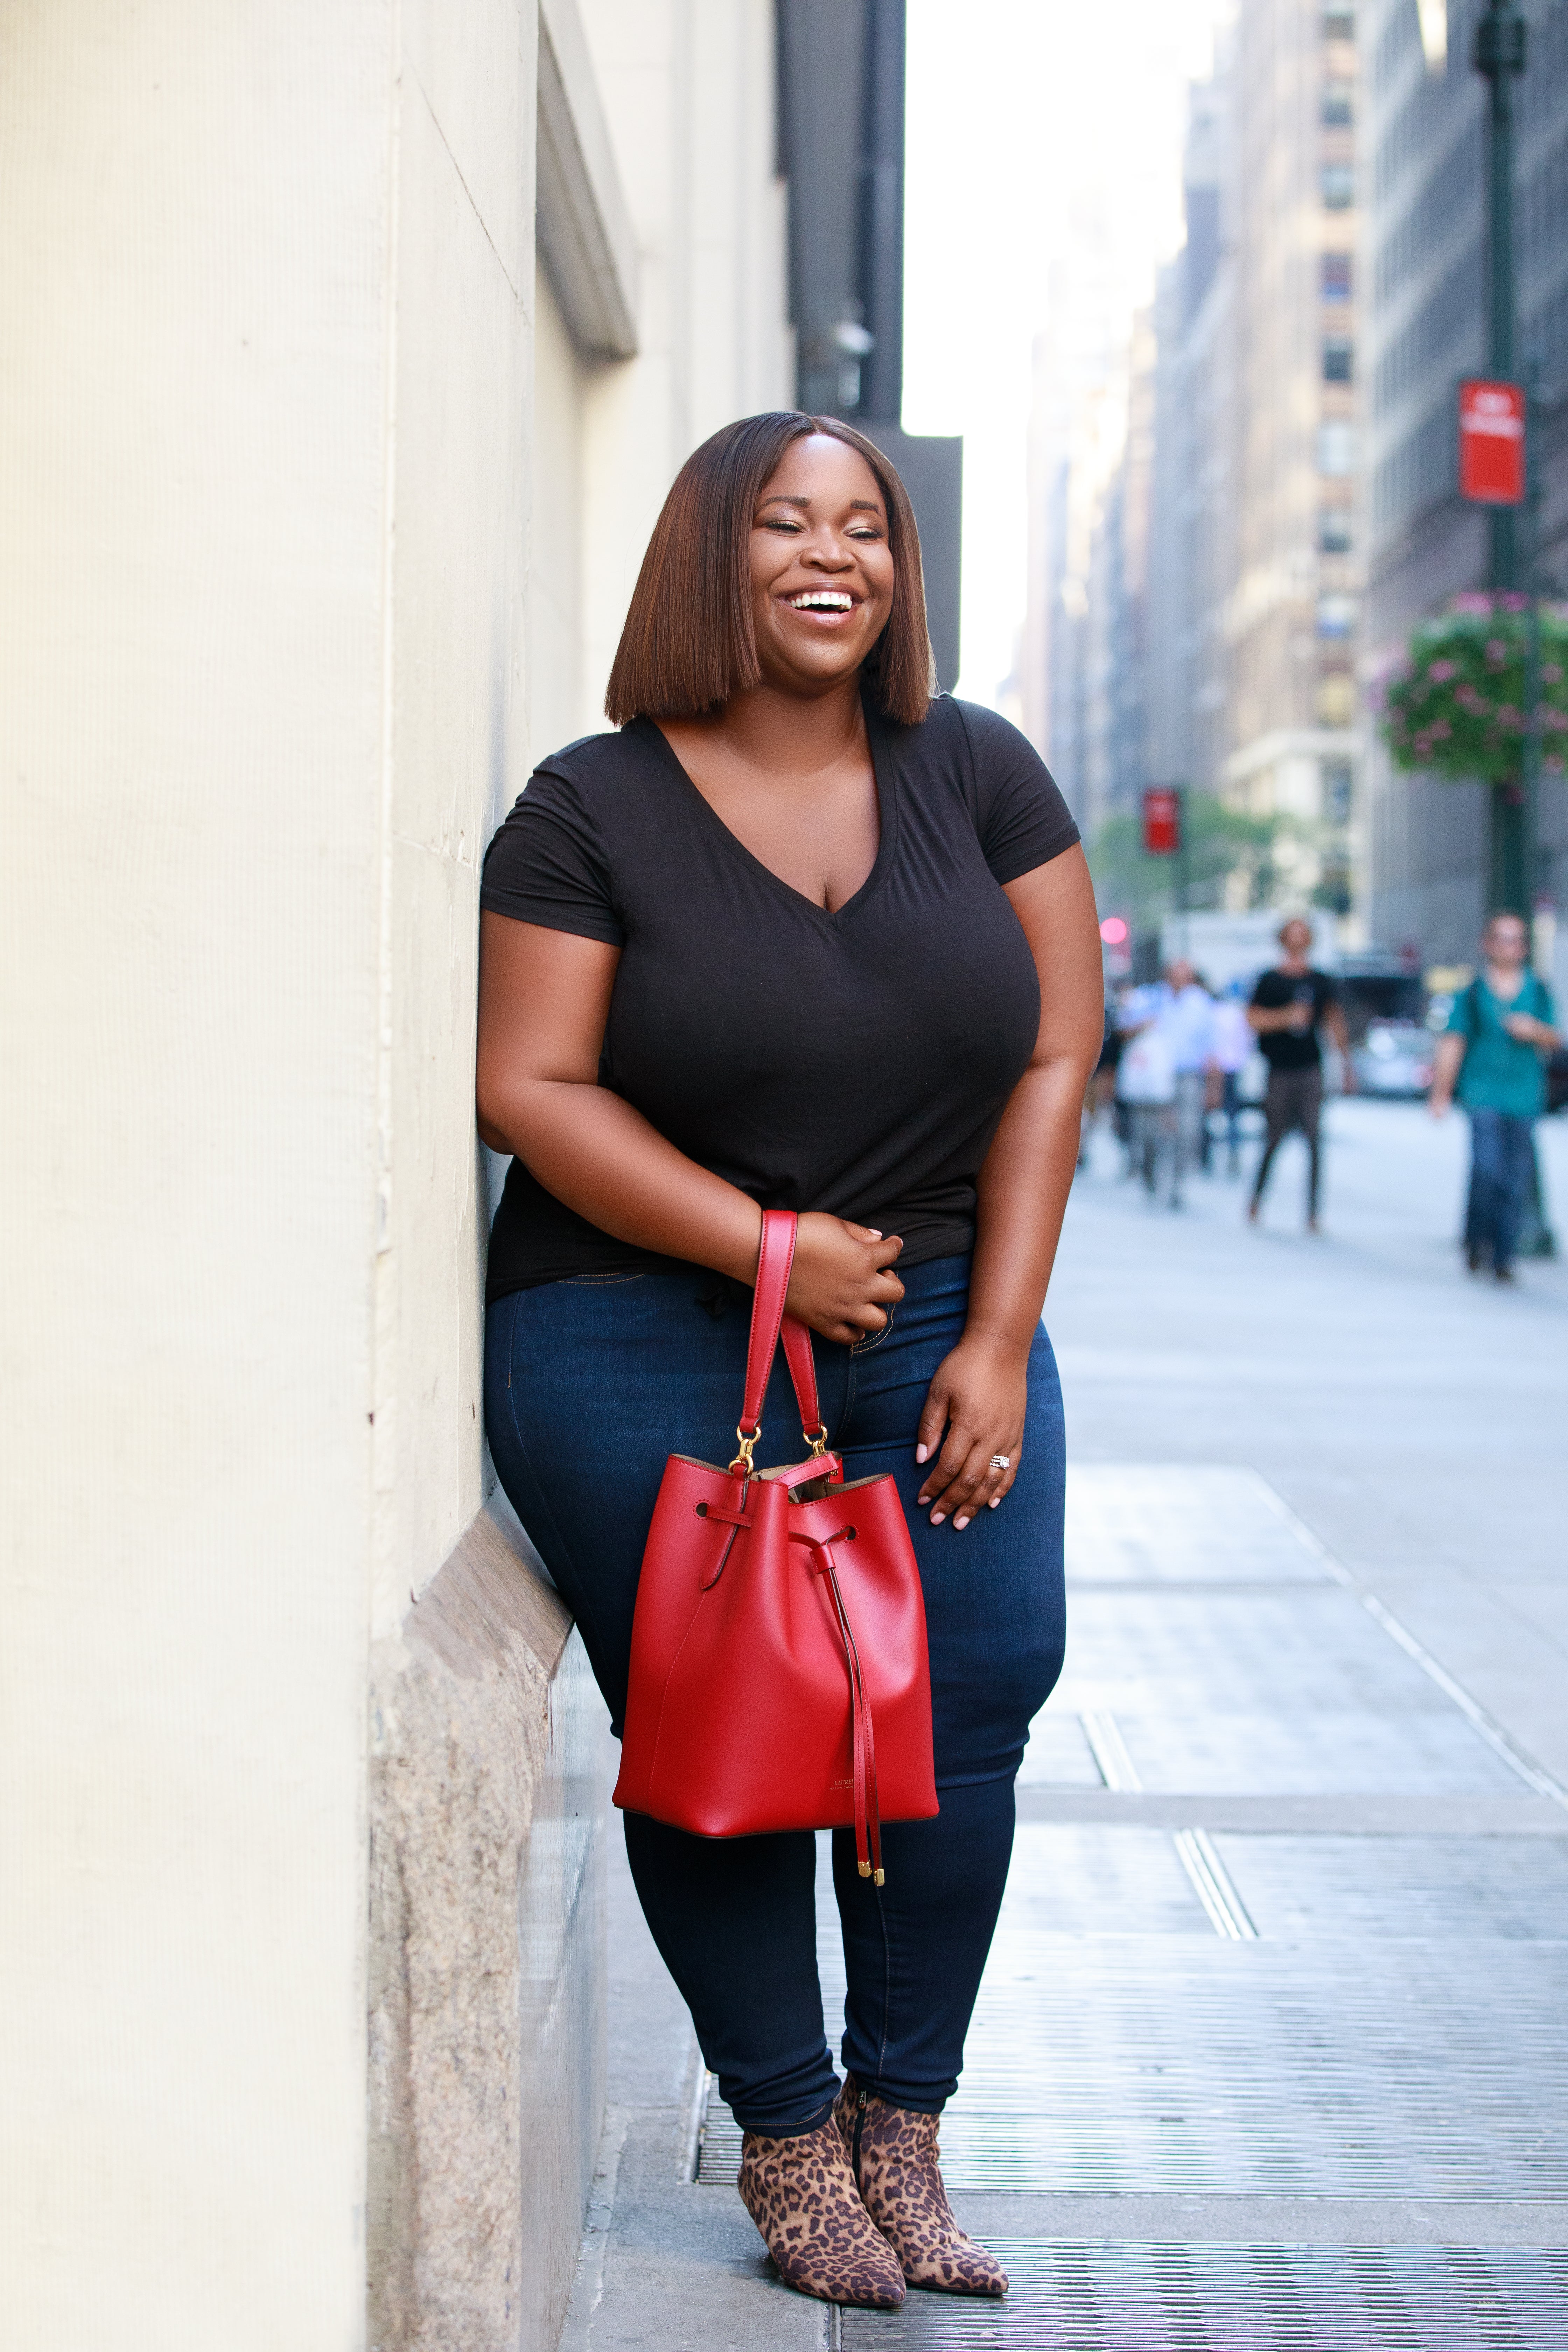 Curvy Girl Fall Fashion Looks From Day To Date Night